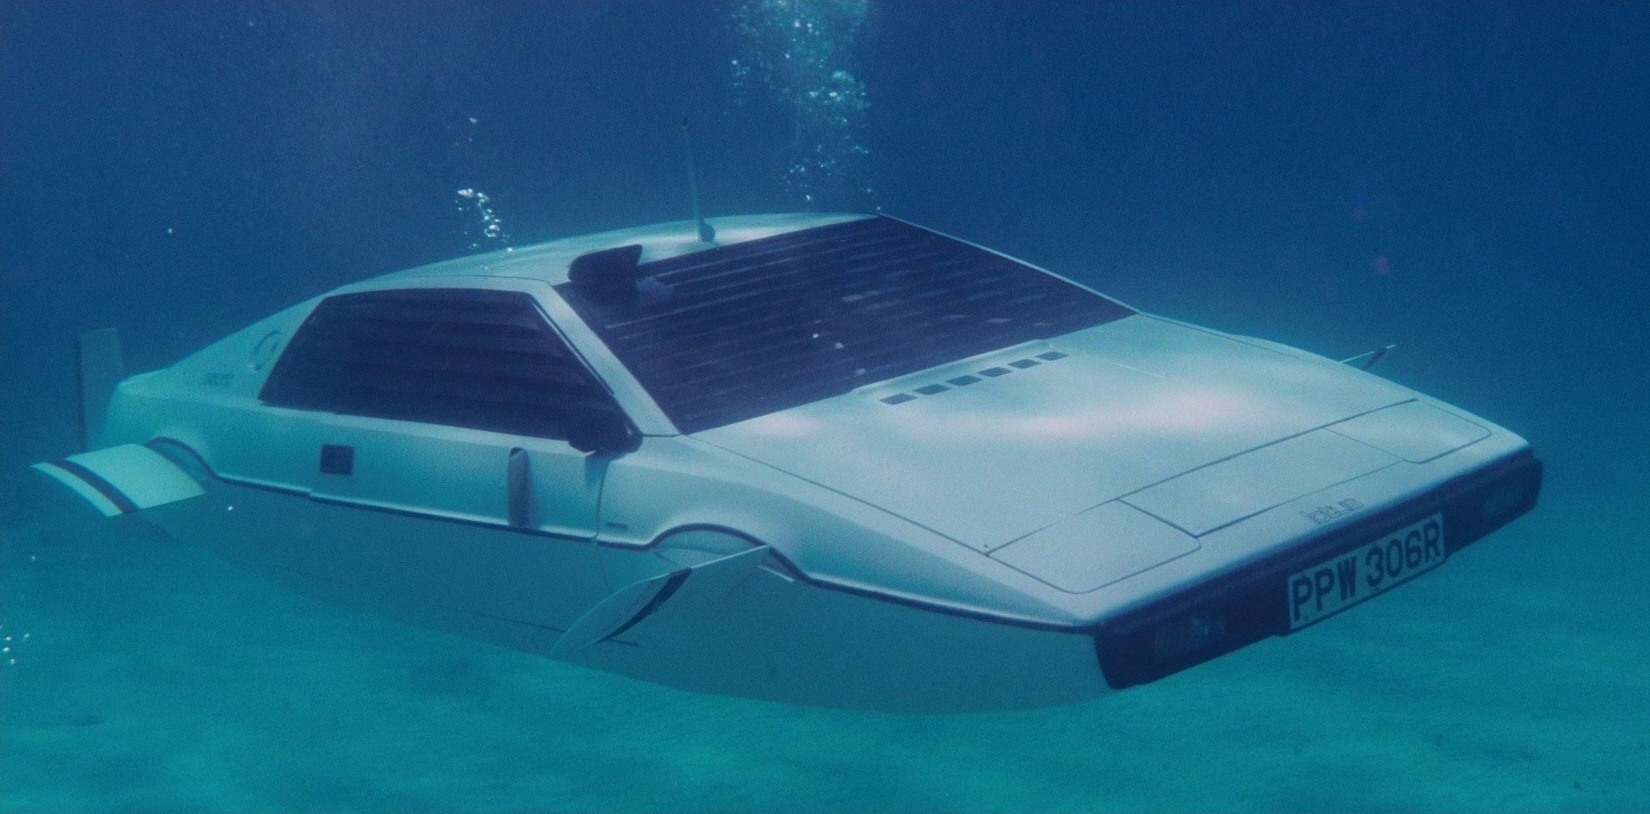 Elon Musk is still planning to make a real amphibious electric vehicle of his James Bond Electrek